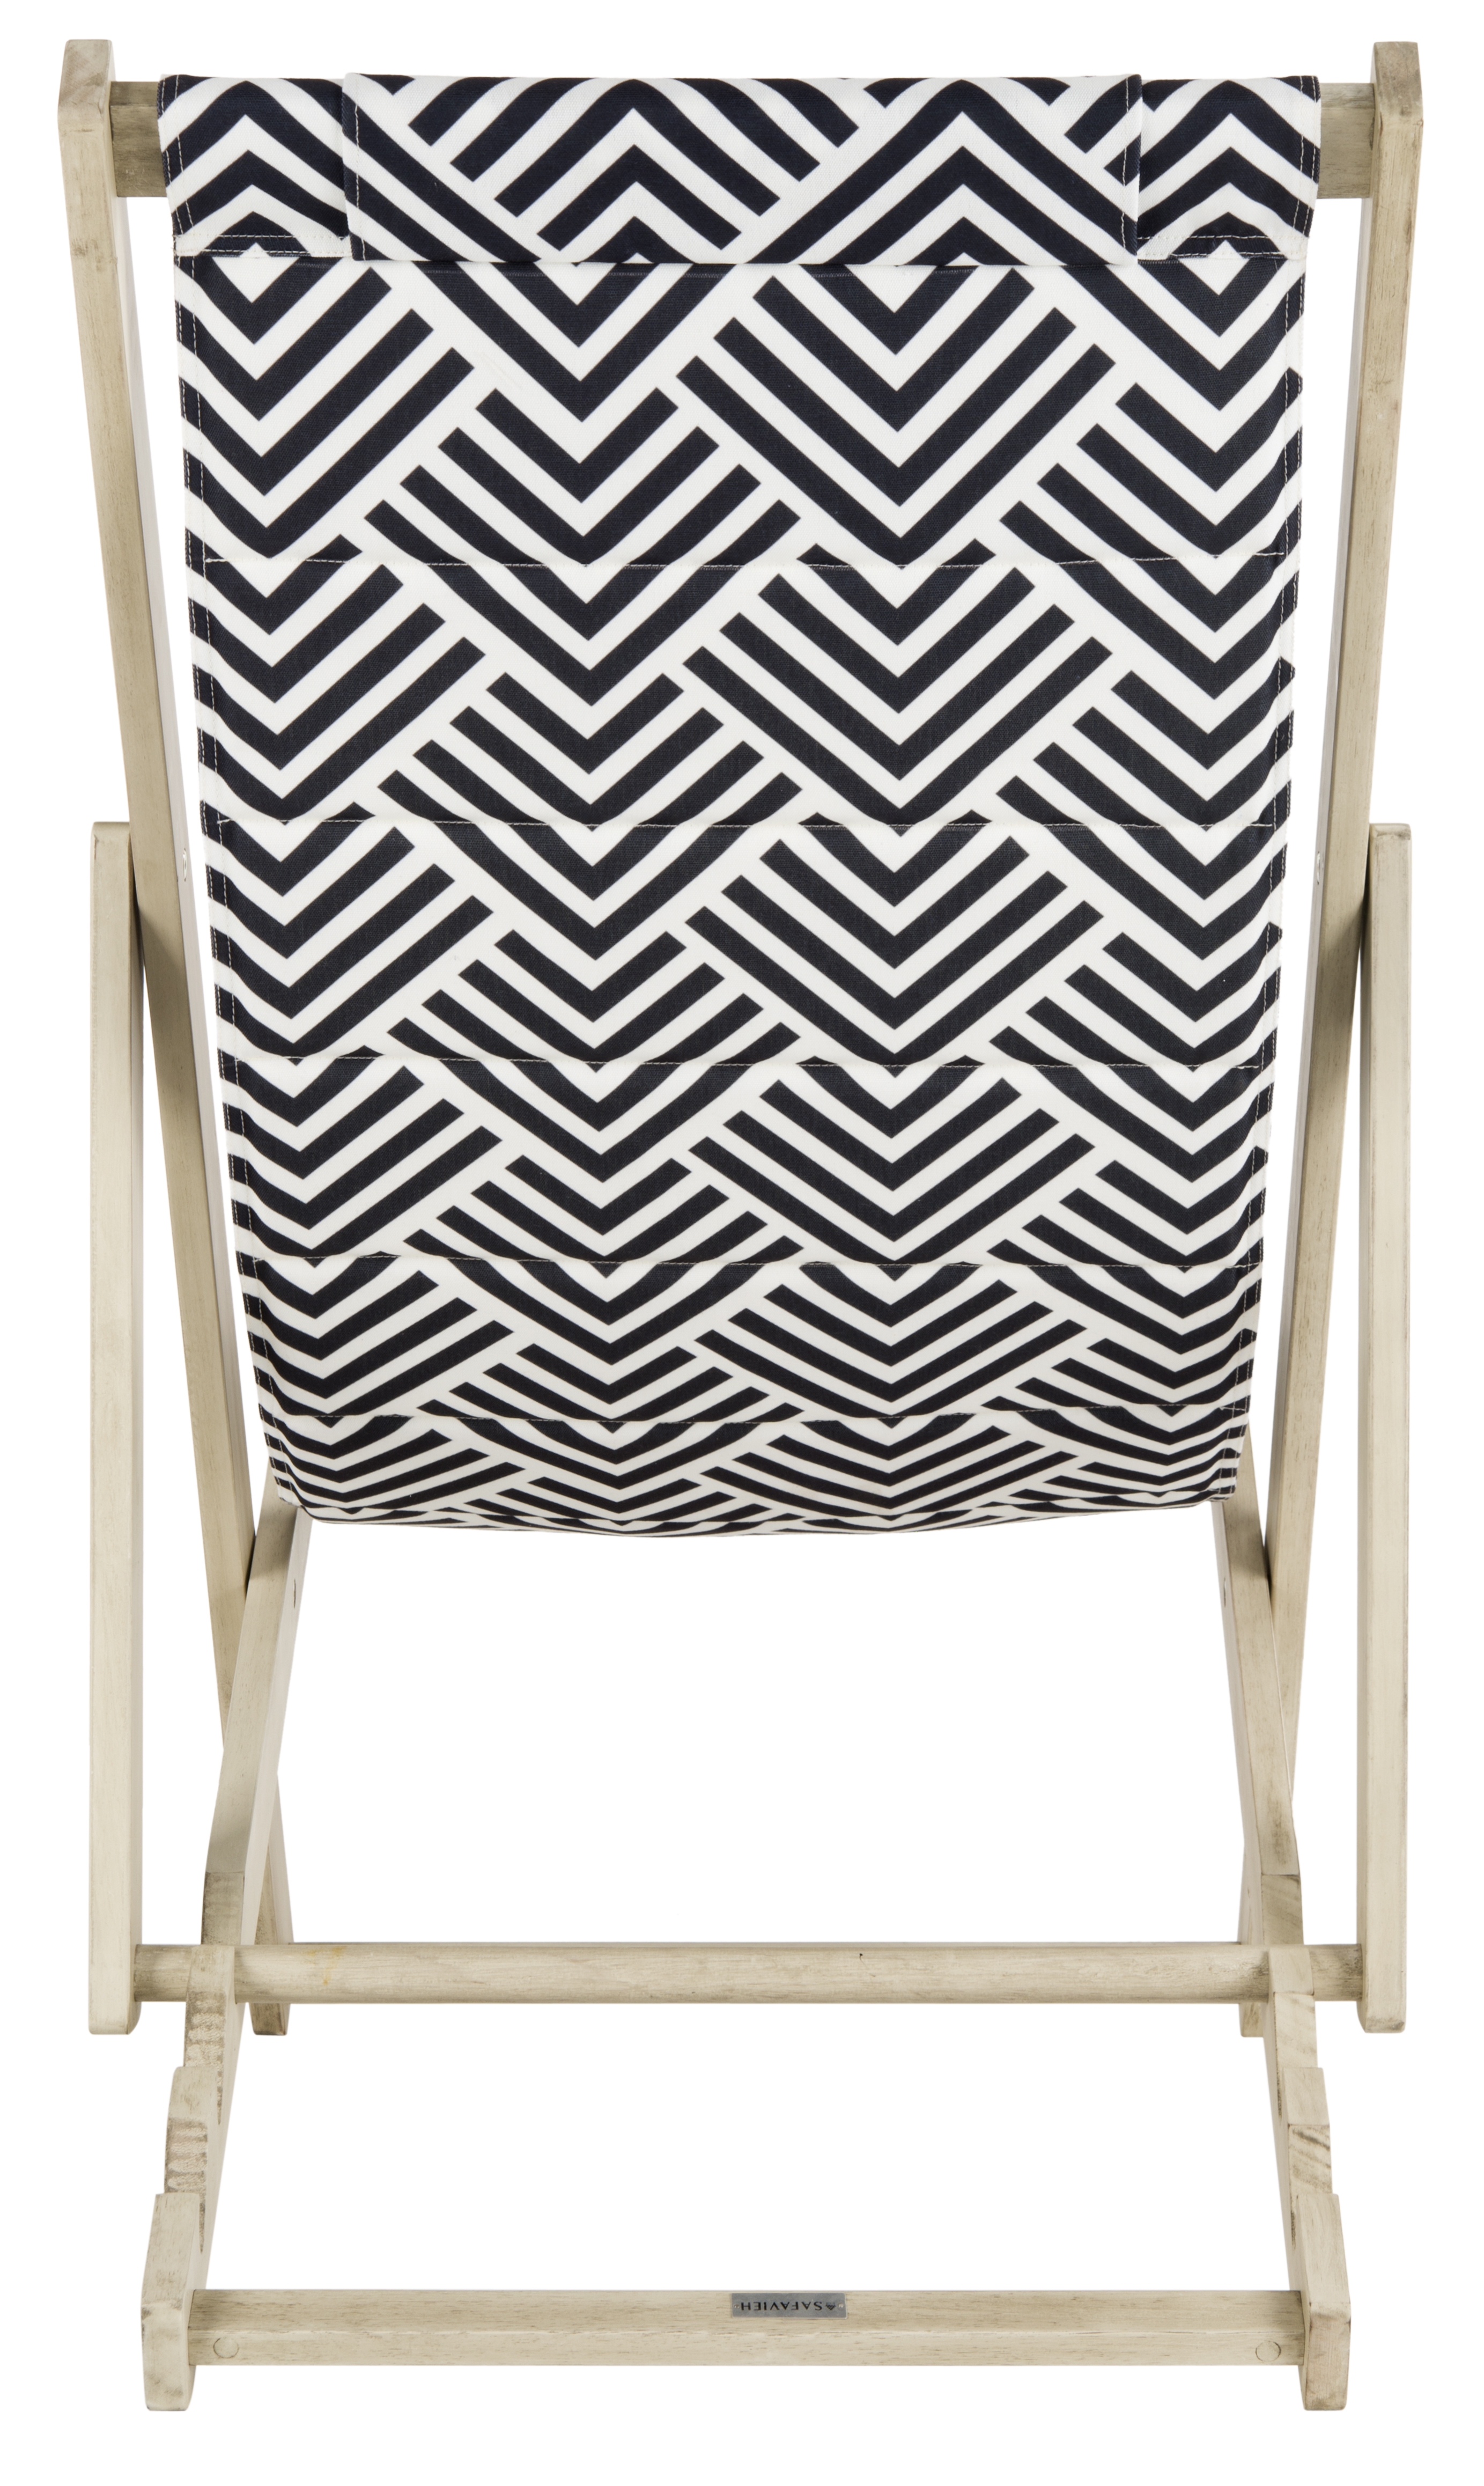 Rive Foldable Sling Chair - White Wash/Navy - Arlo Home - Image 4